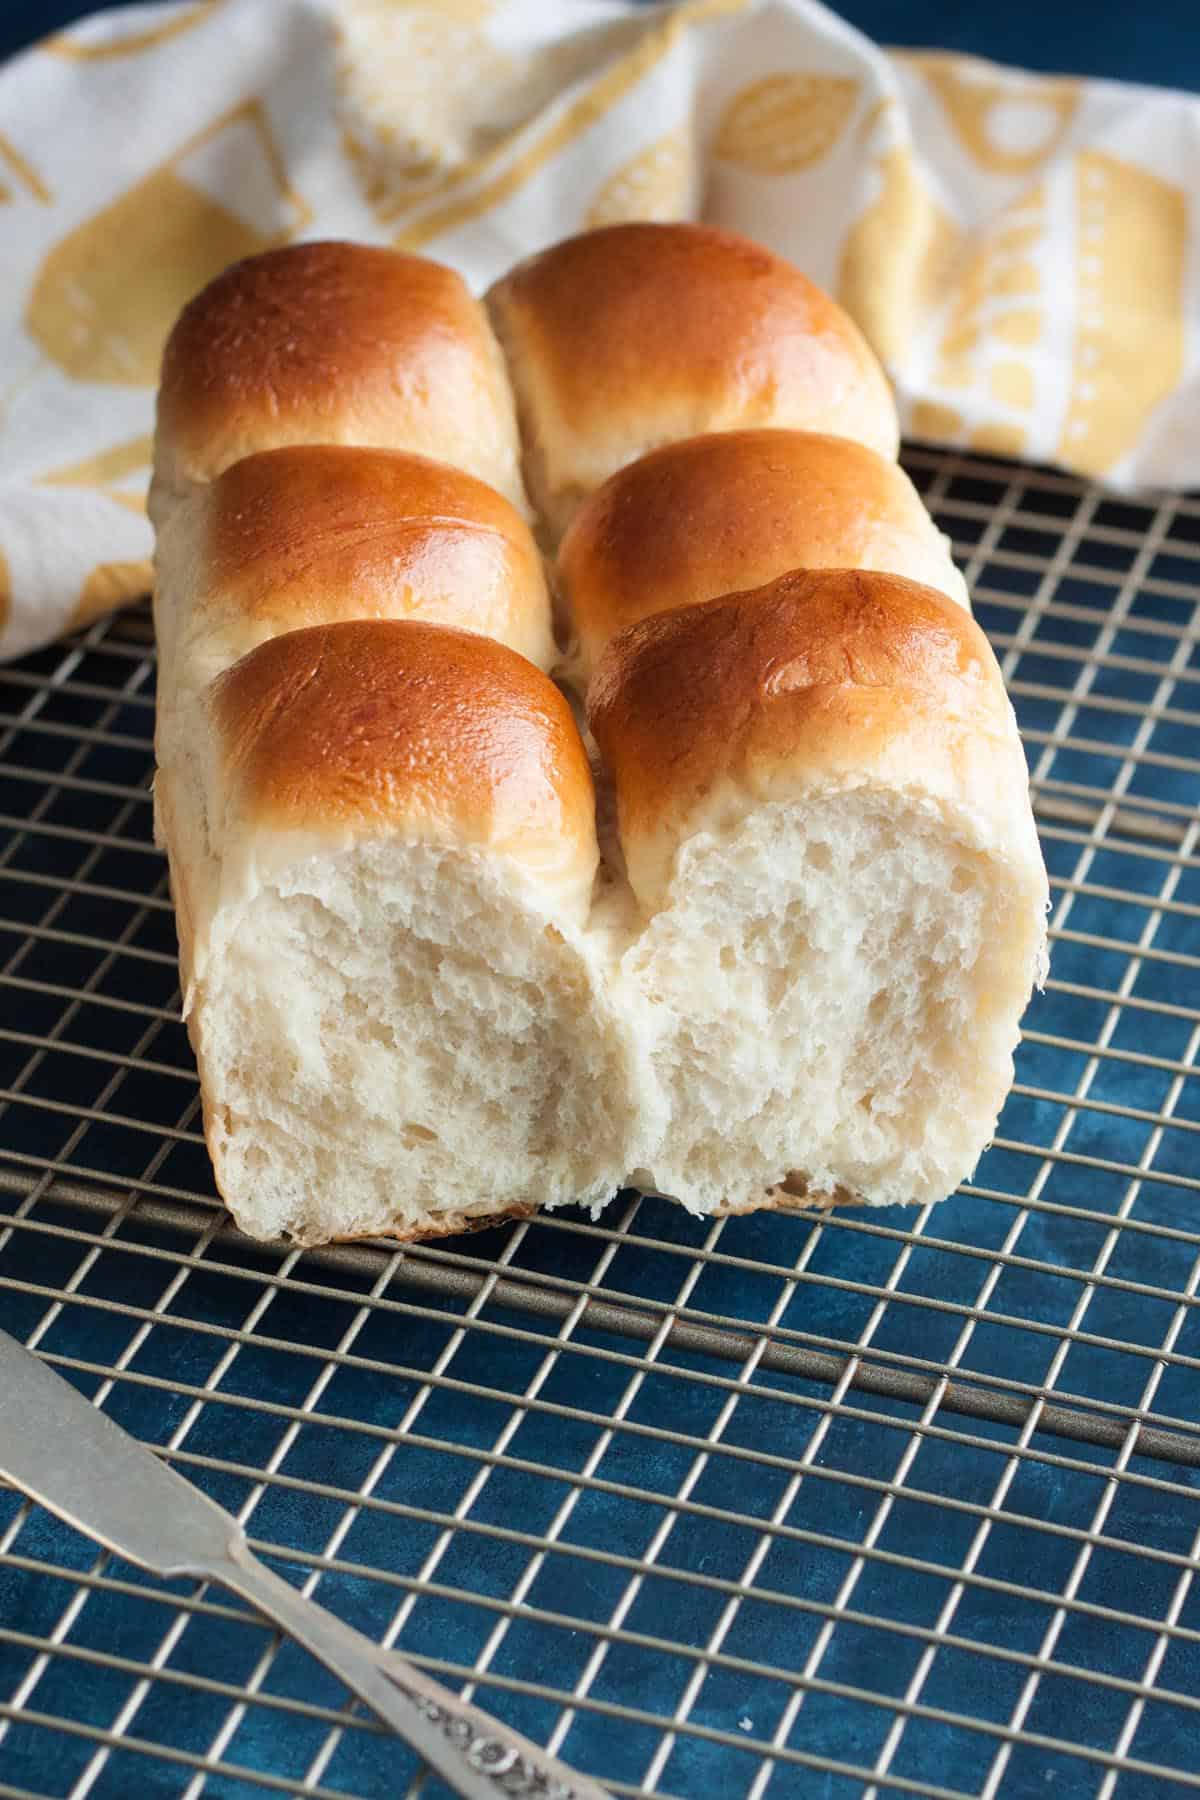 A loaf of milk bread with some sections already pulled apart.